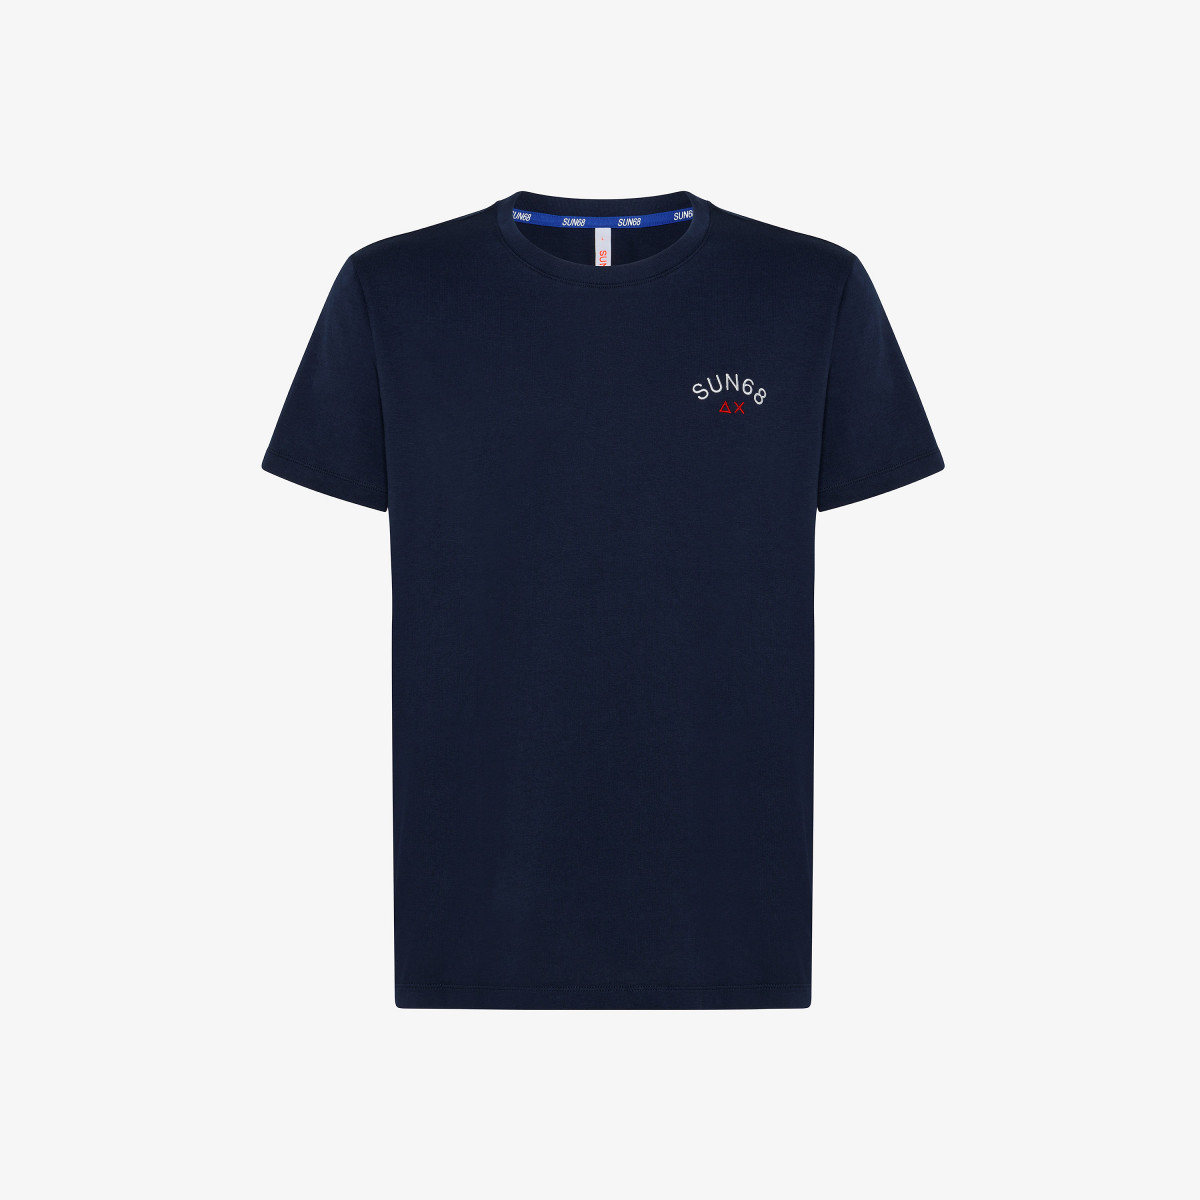 T-SHIRT SMALL LOGO ON CHEST NAVY BLUE